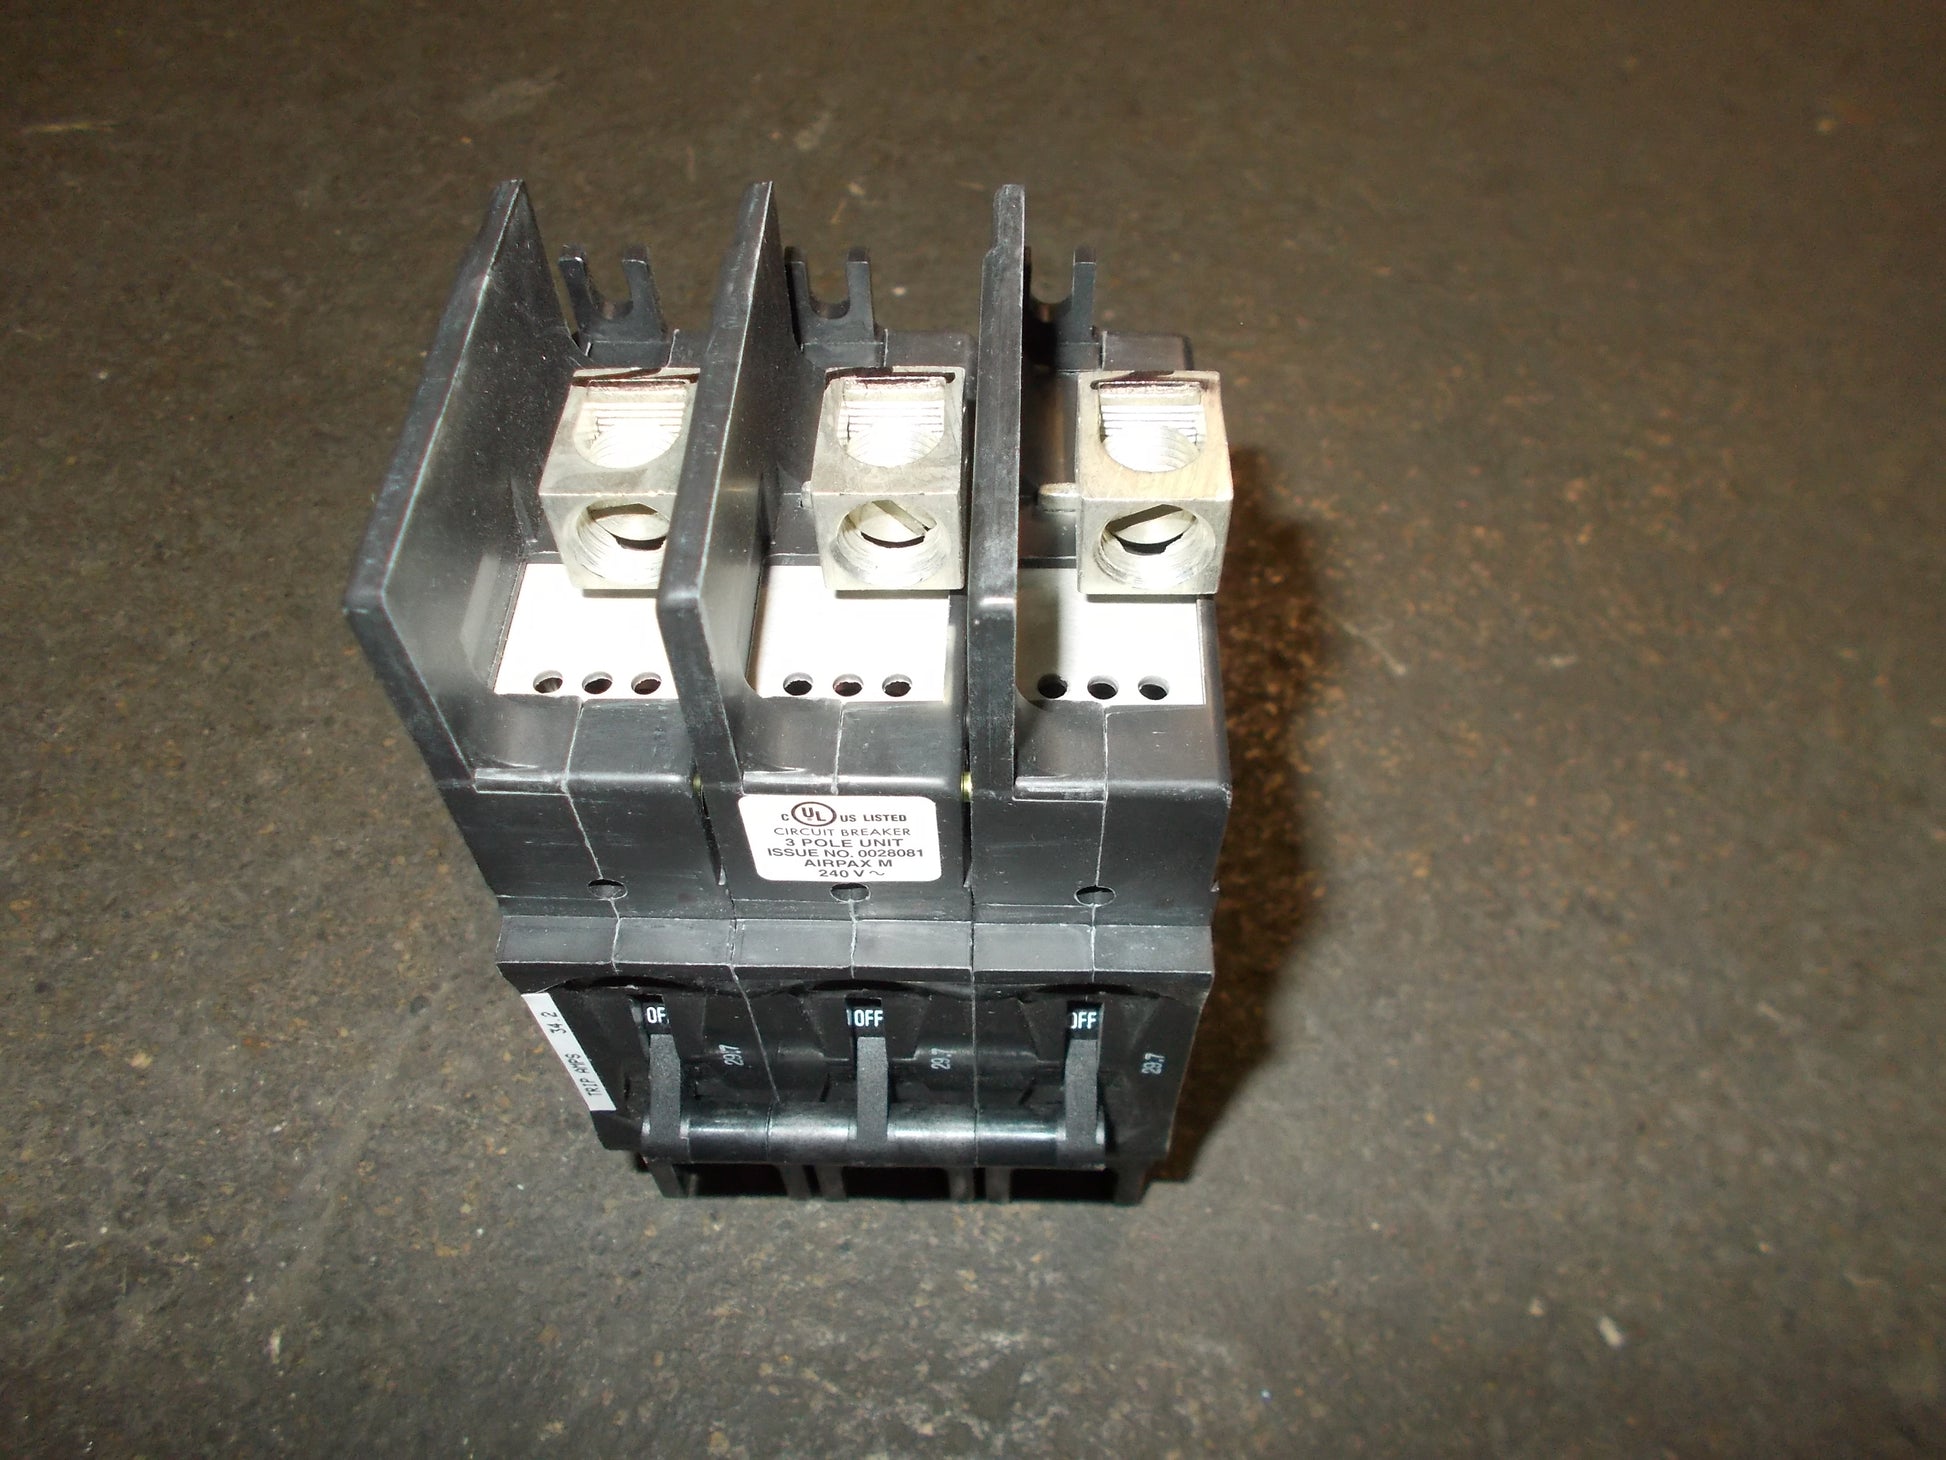 3 POLE  29.7 AMP "209 MULTI-POLE" SERIES HYDRAULIC MAGNETIC CIRCUIT BREAKER PROTECTOR 240/50-60/1 OR 3